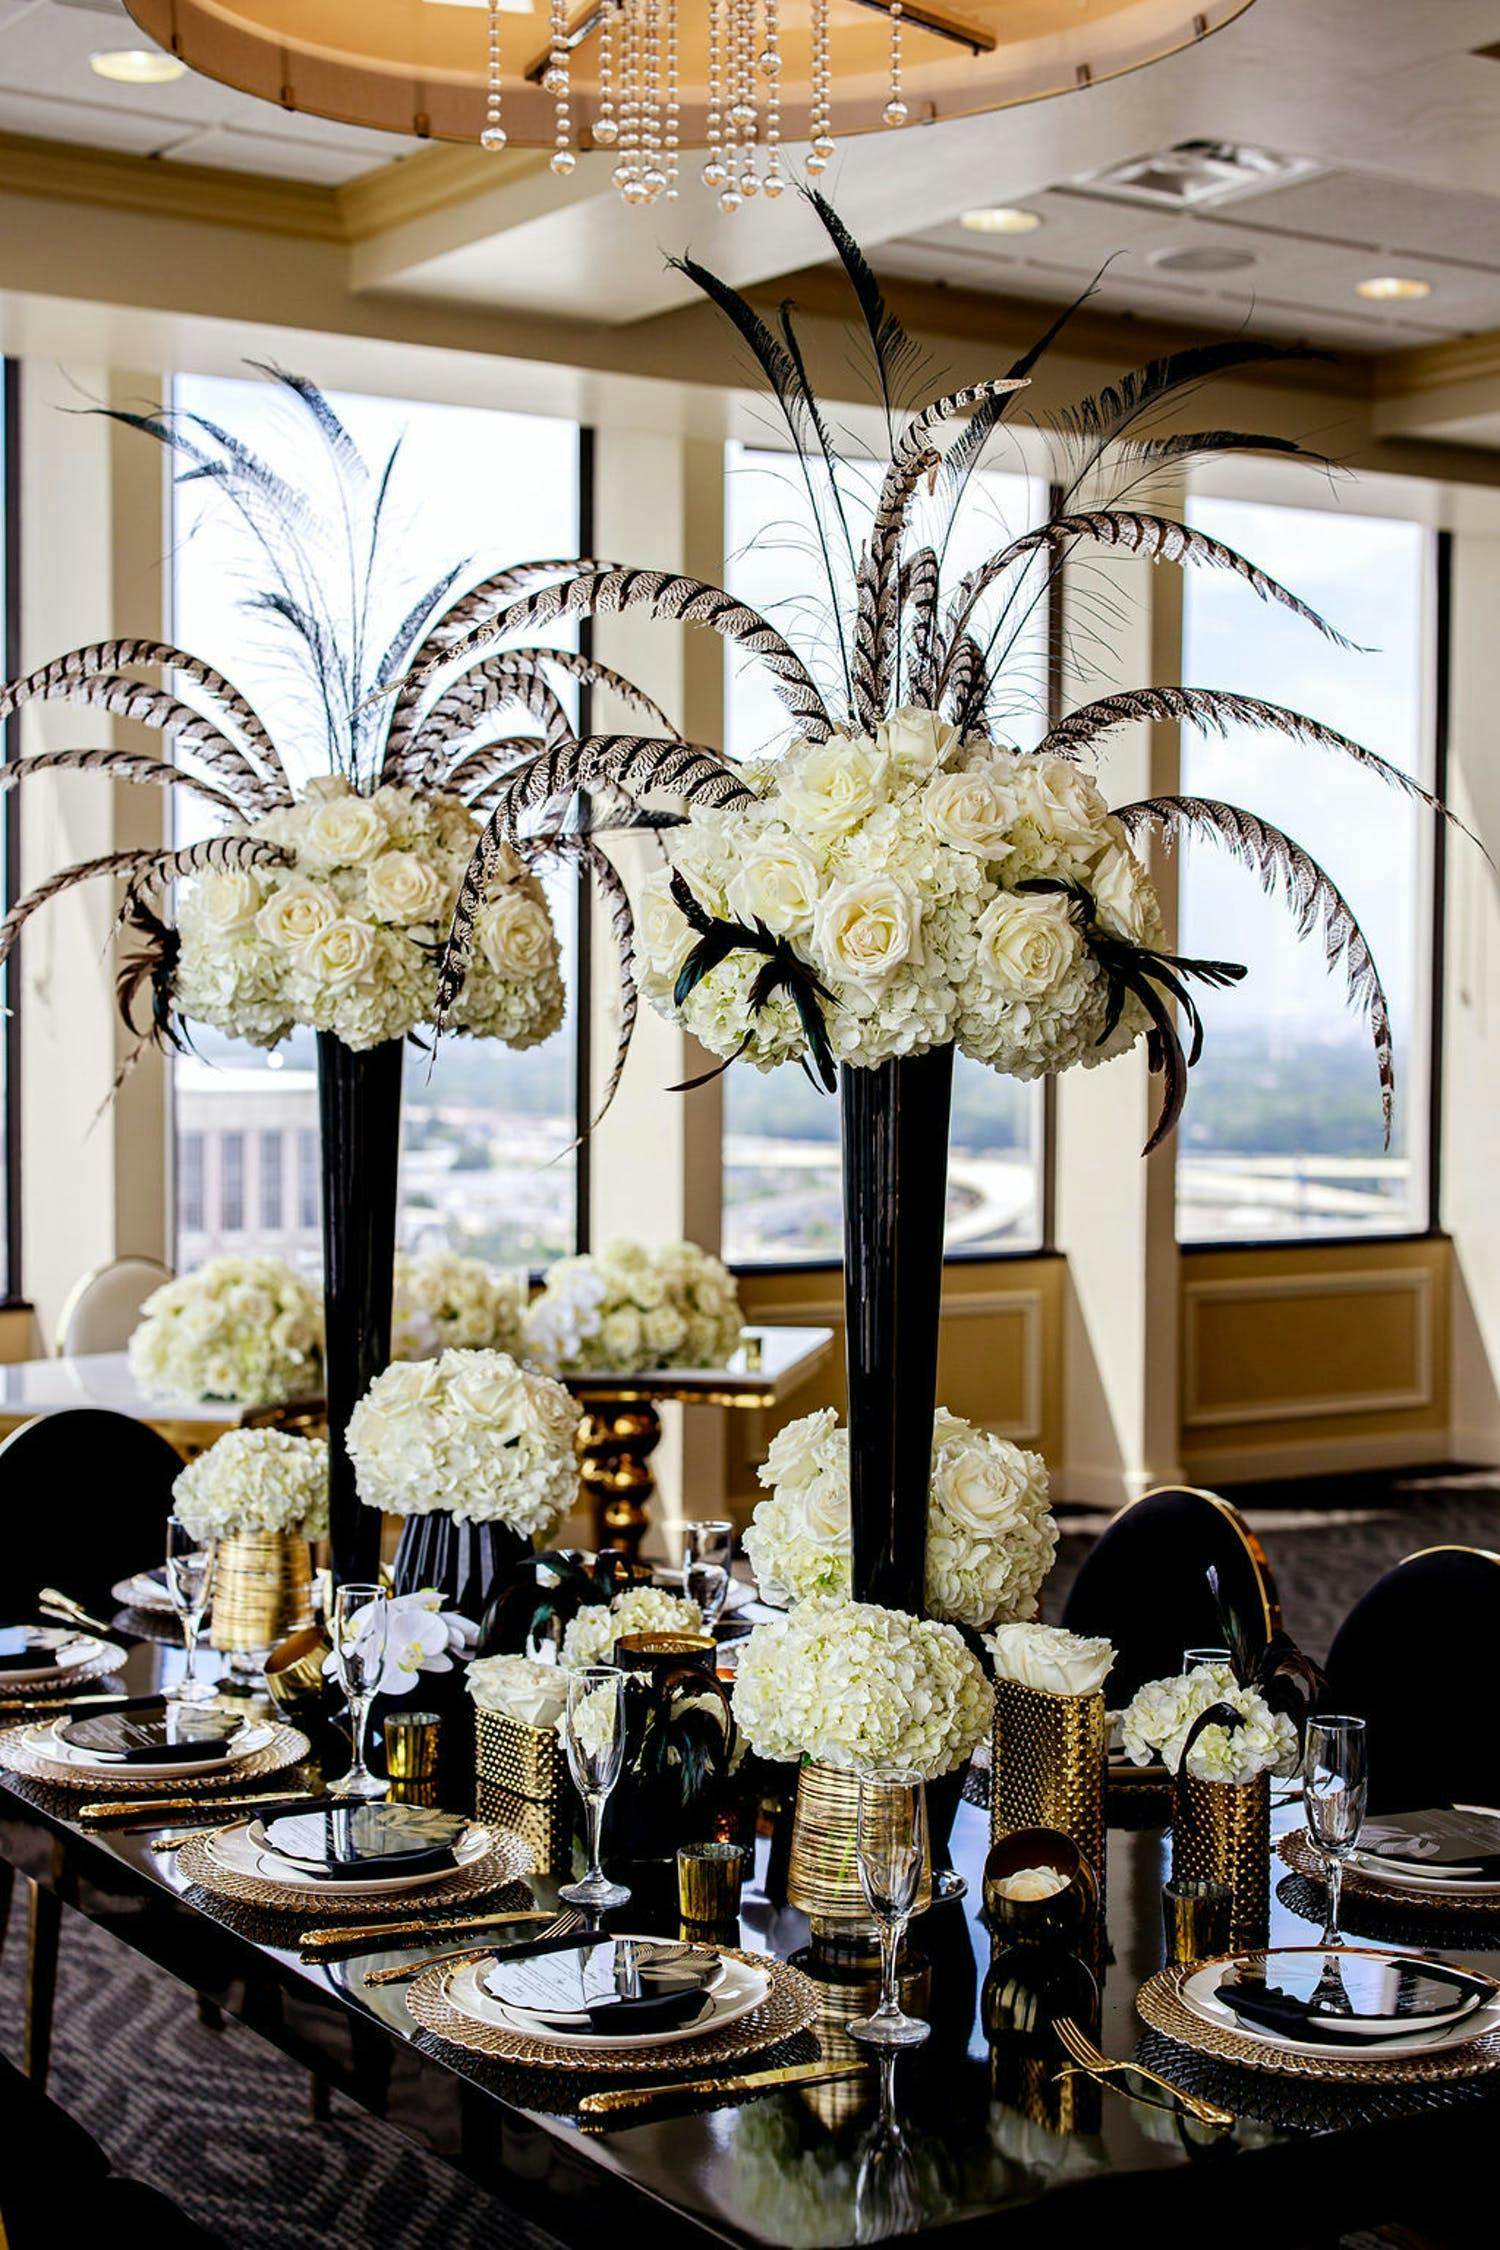 Gatsby-Themed Tablescapes with Black and White Wedding Décor | PartySlate